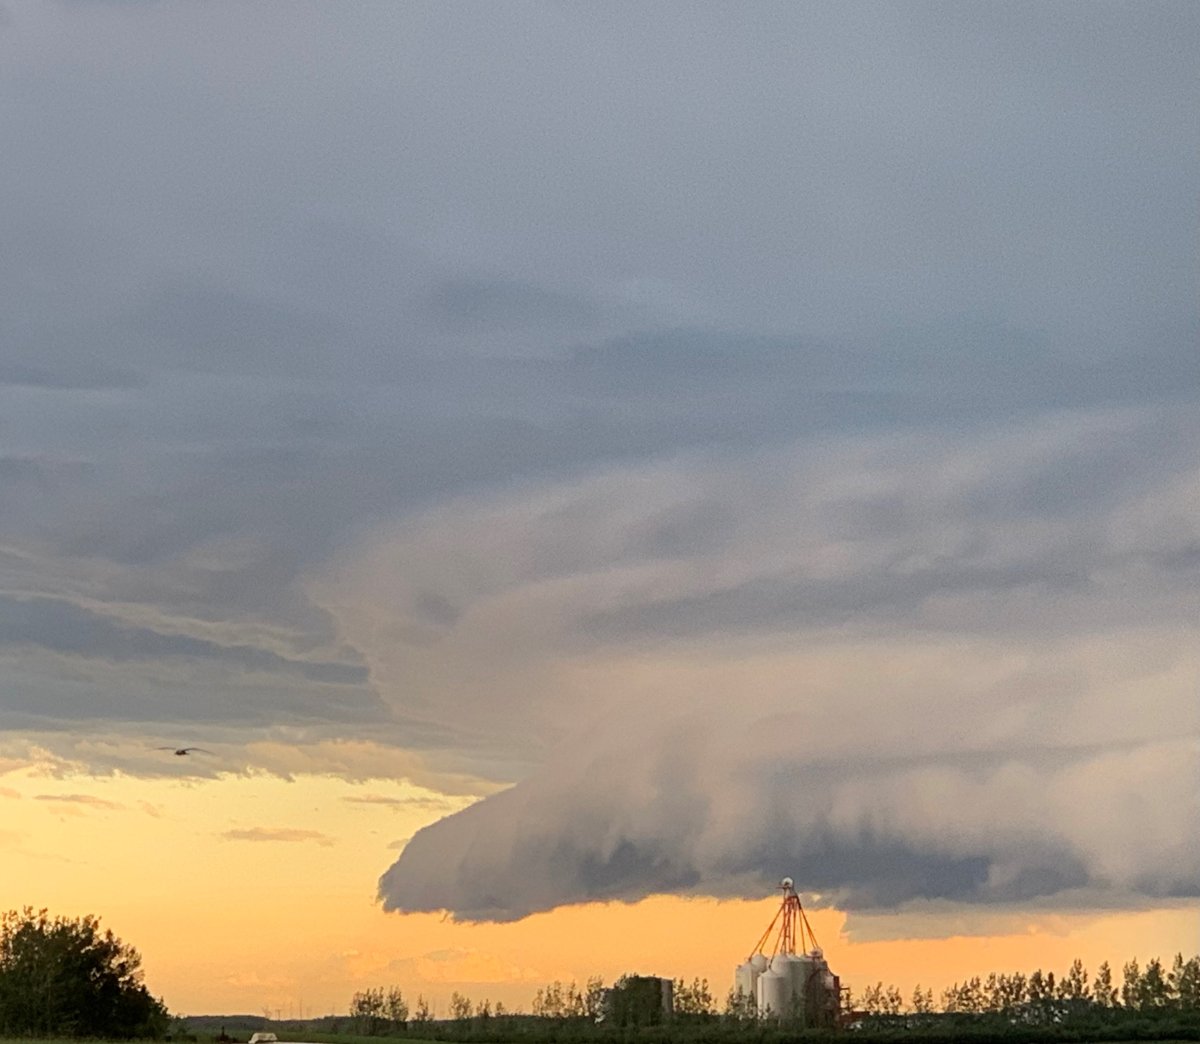 This photo of a storm cloud was submitted on June 24, 2022 as severe storms affected parts of Saskatchewan.